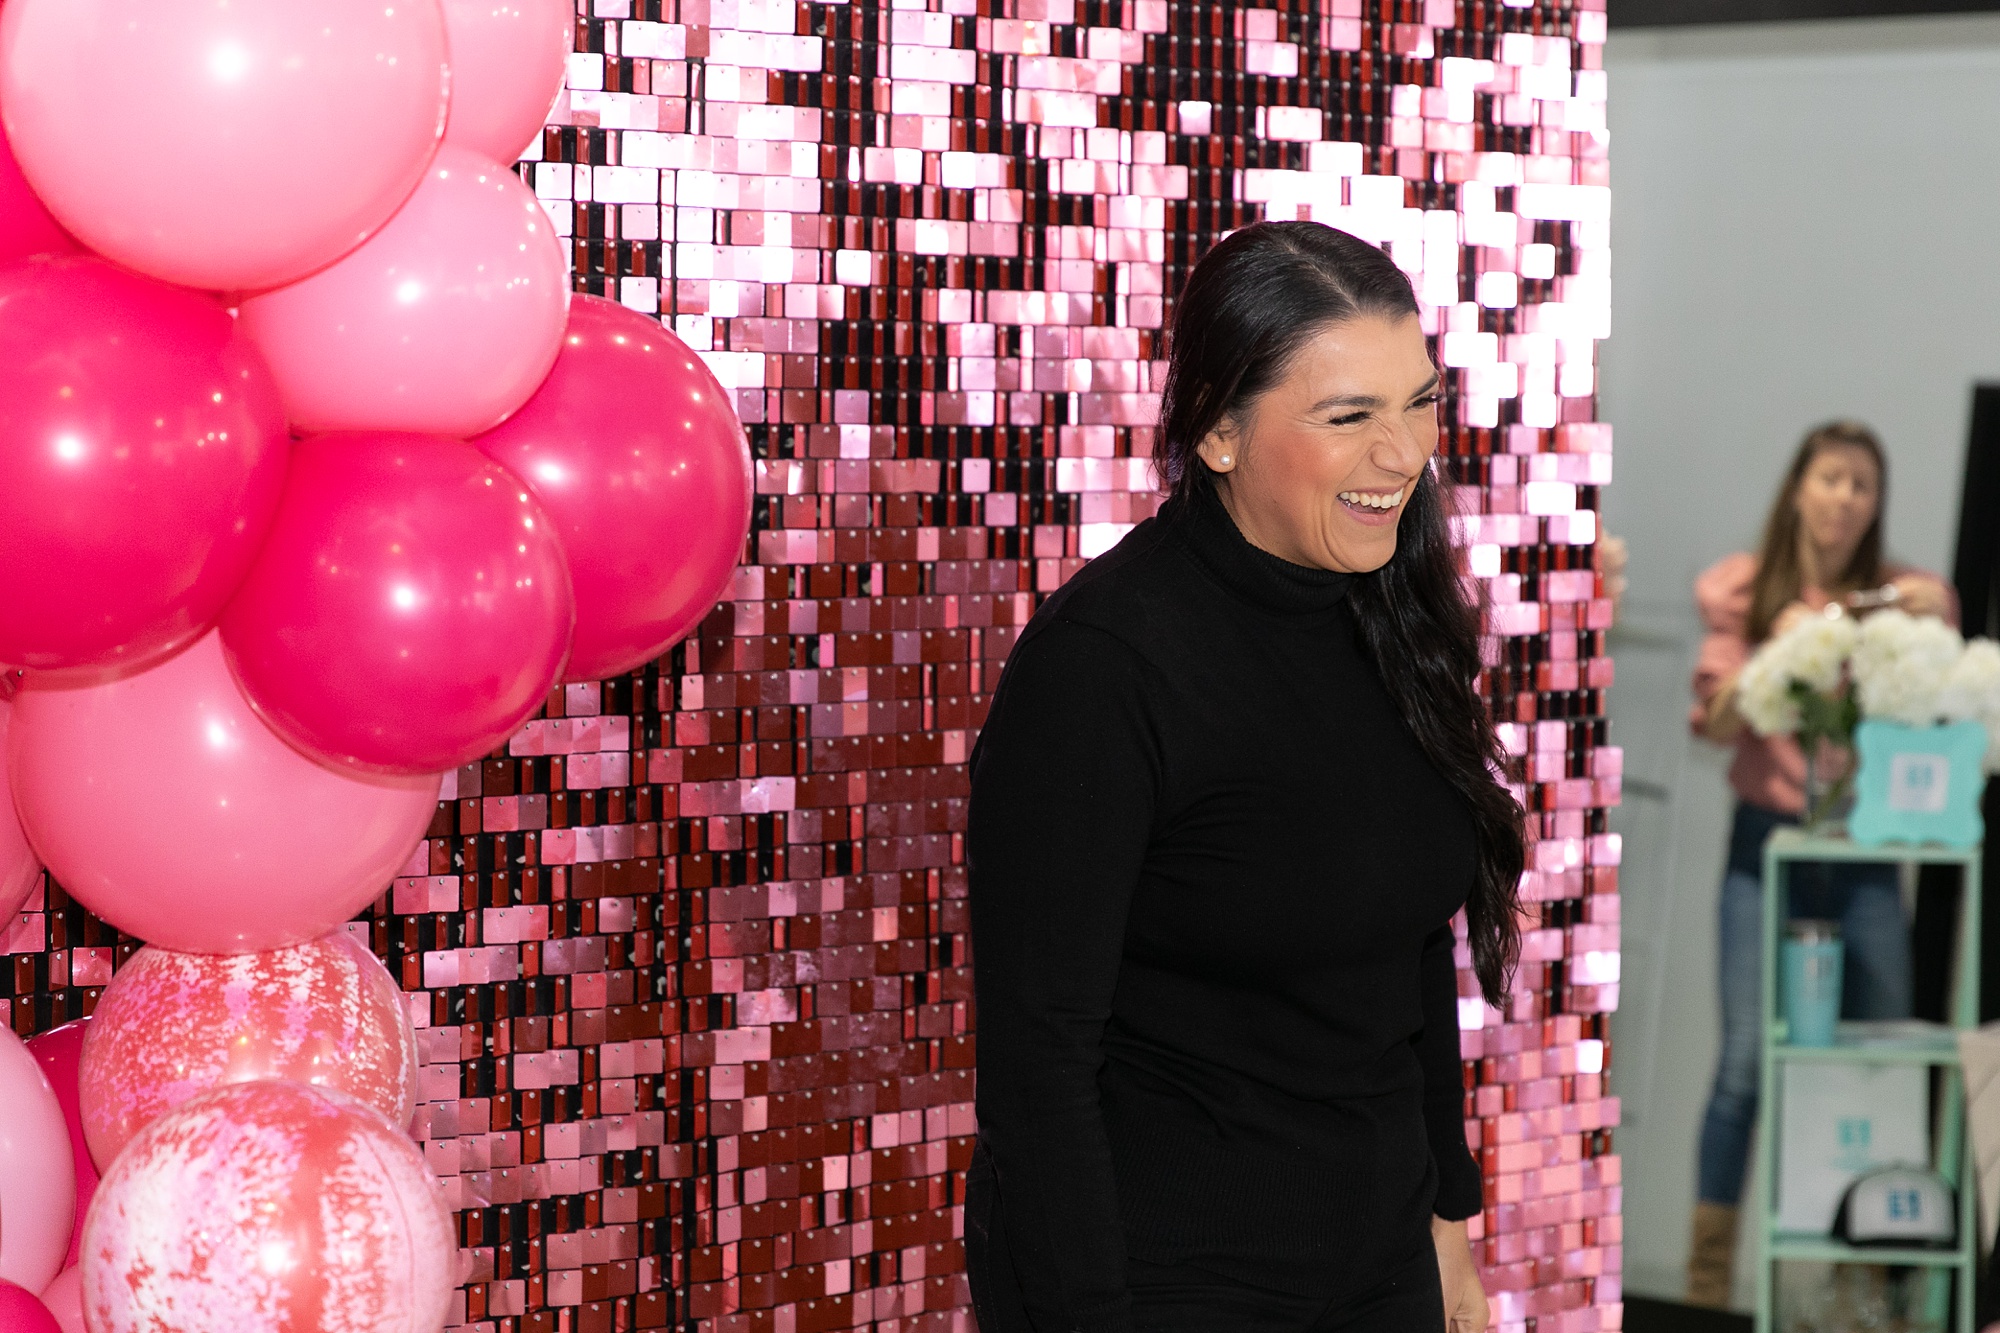 guest laughs in front of hot pink photo booth backdrop